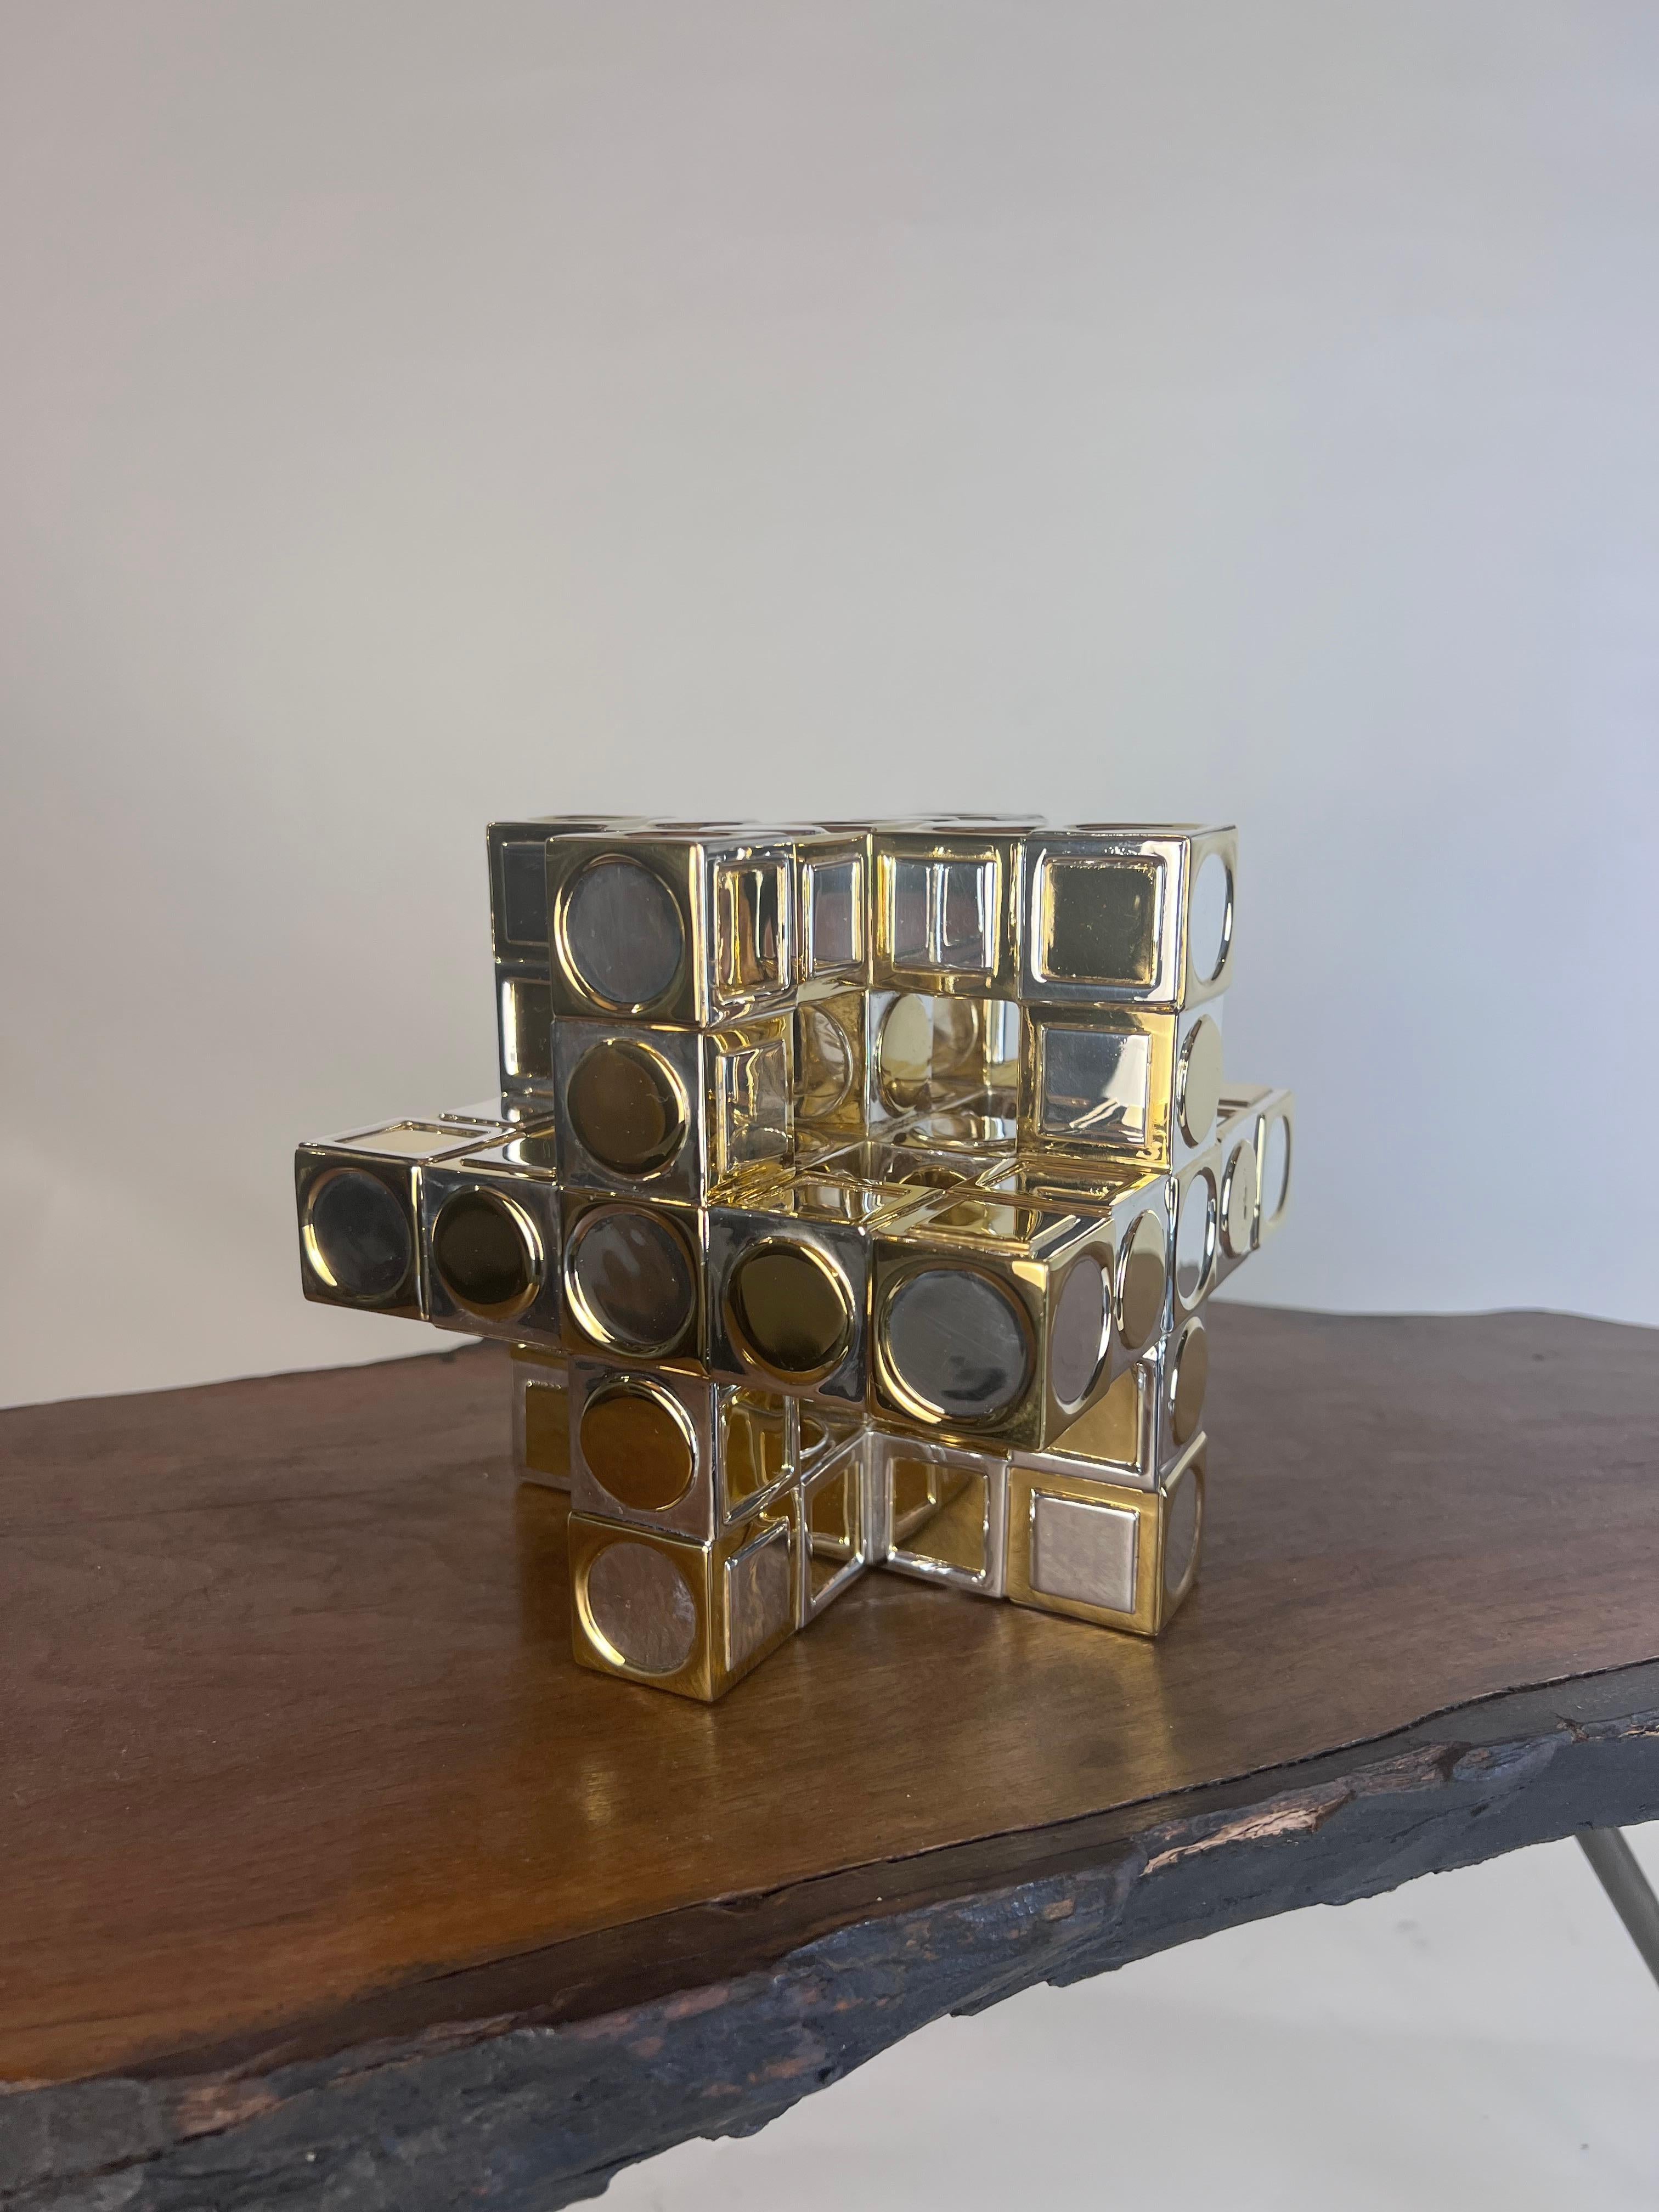 A rare TANE Orfebres Sterling Silver with vermeil sculpture by Victor Vasarely named Cuadratura. Series 6 / 20 and signed on one of its sides. Manufactured in 1978.

Weight: 2390 g.
Measurements: 15 x 15 x 15 cm. (5.9 x 5.9 x 5.9